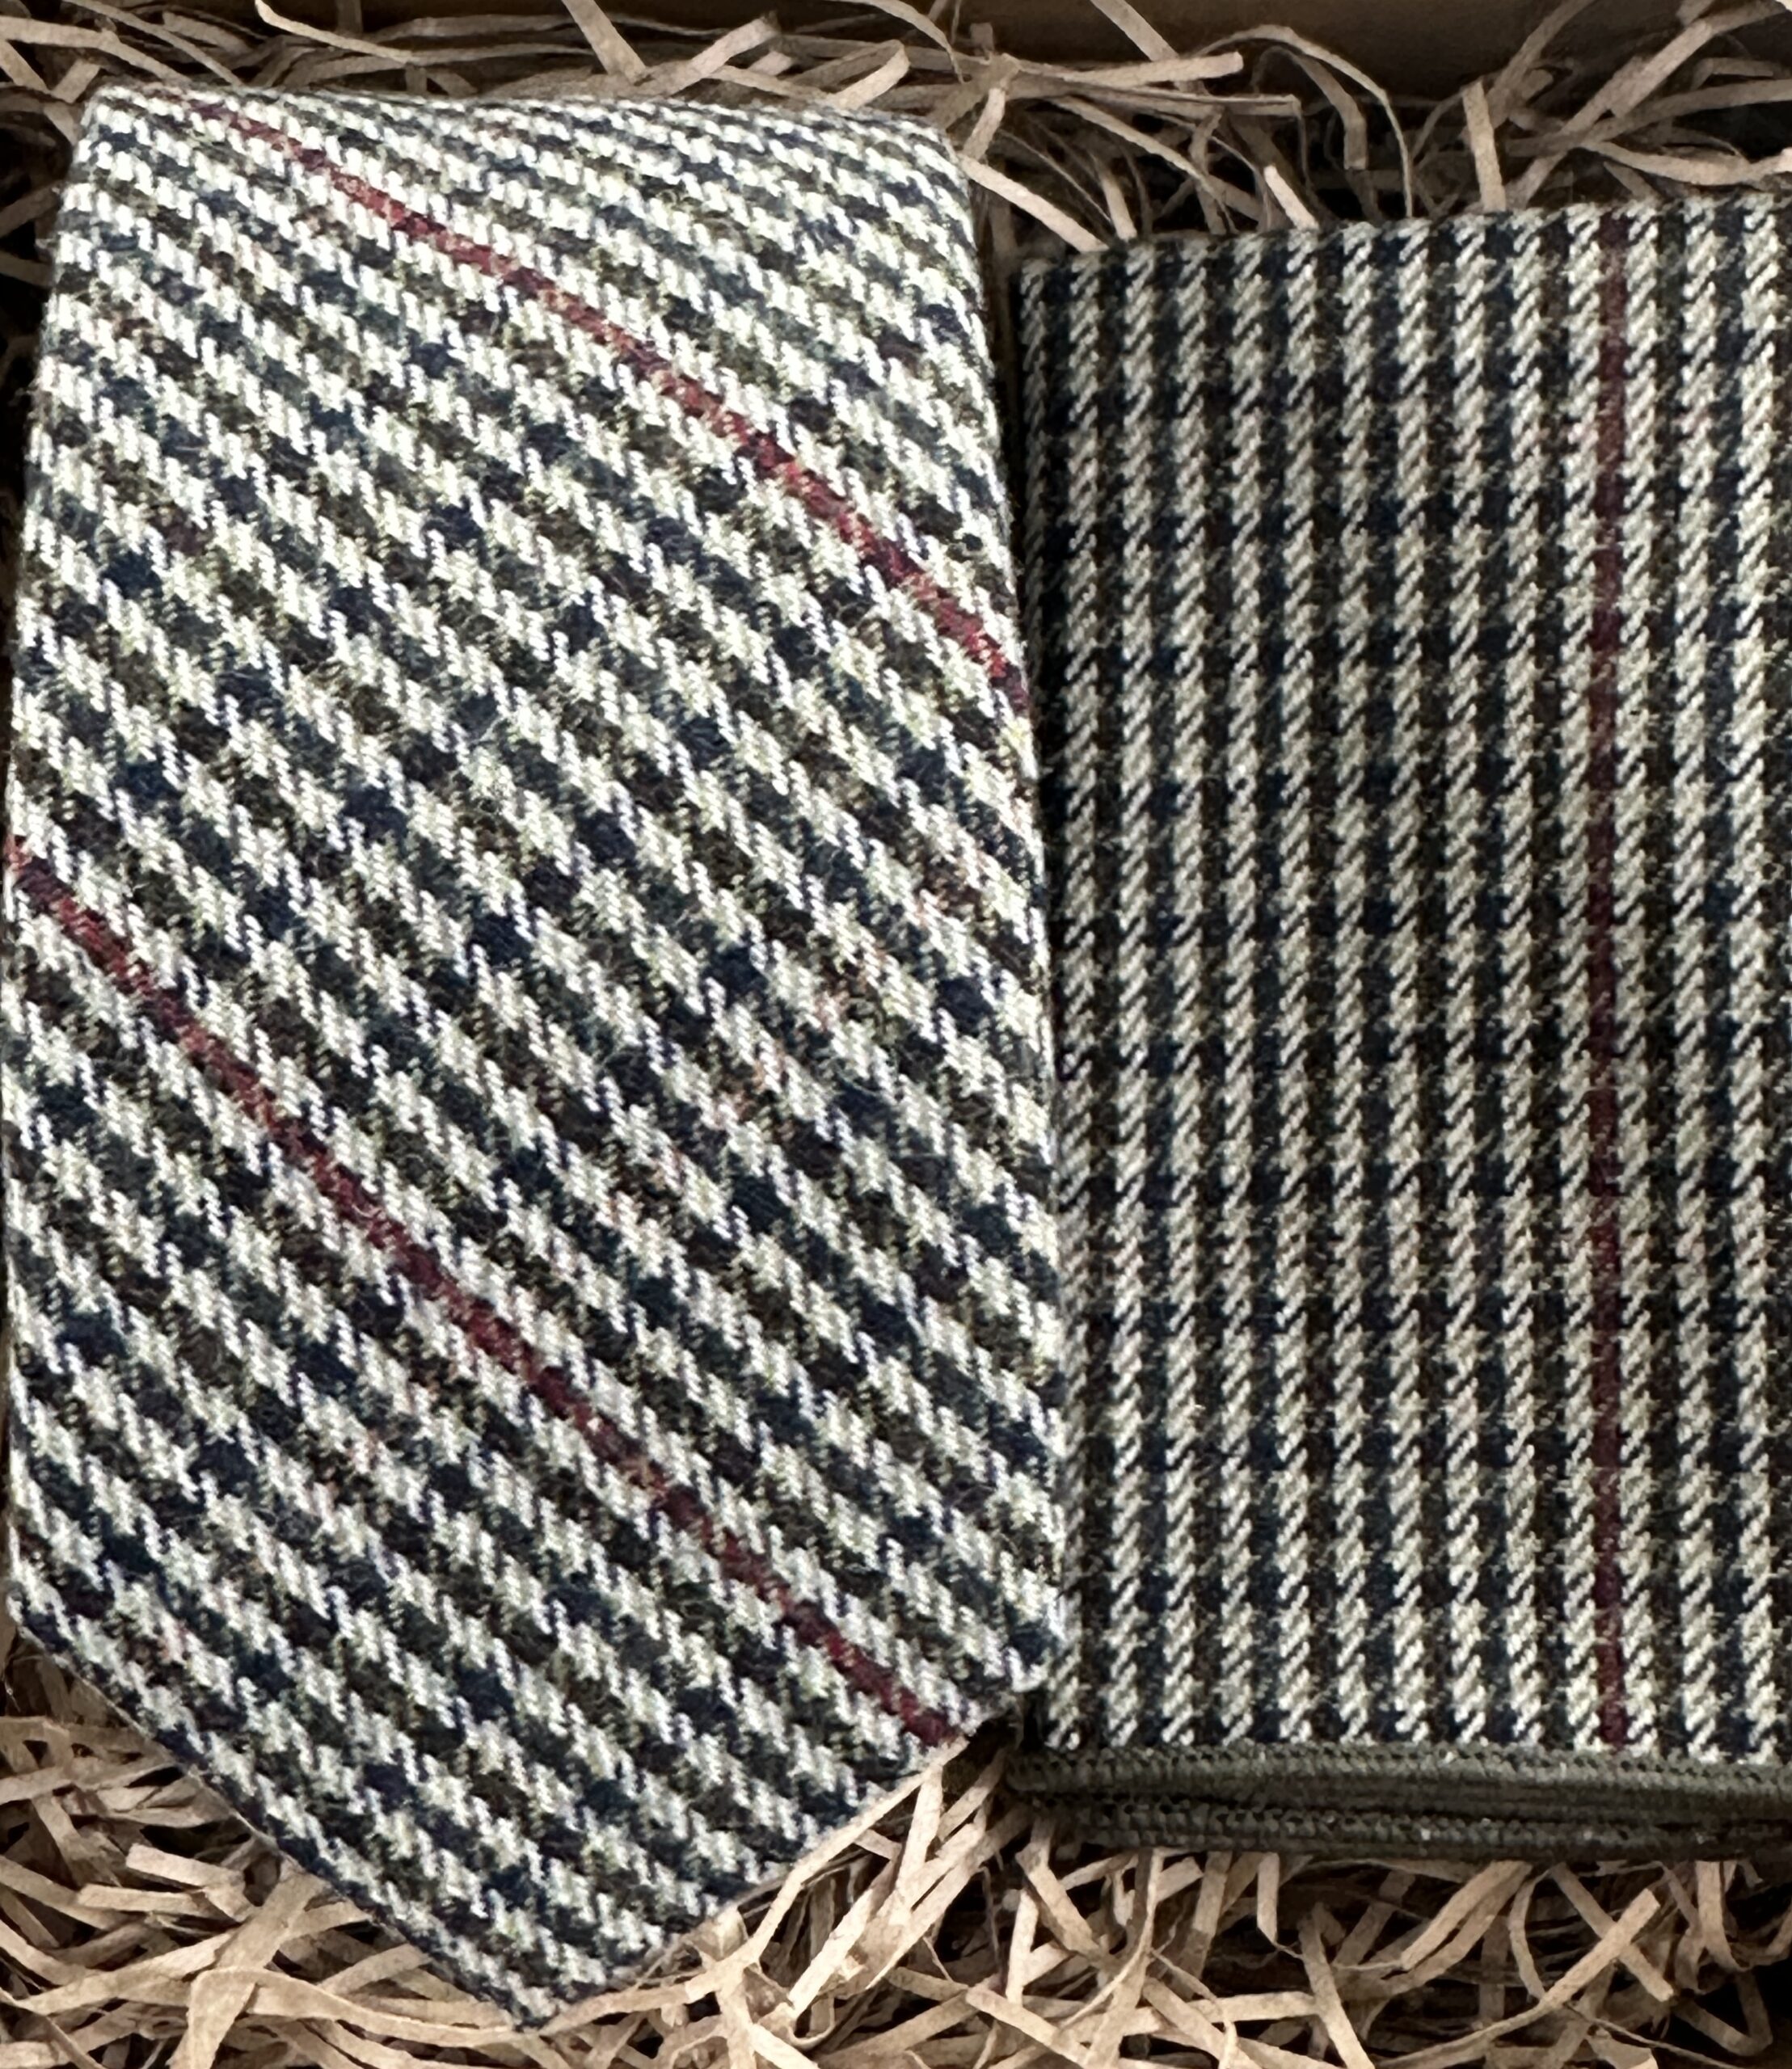 A photo of a check tie and pocket square ideal for a vintage style